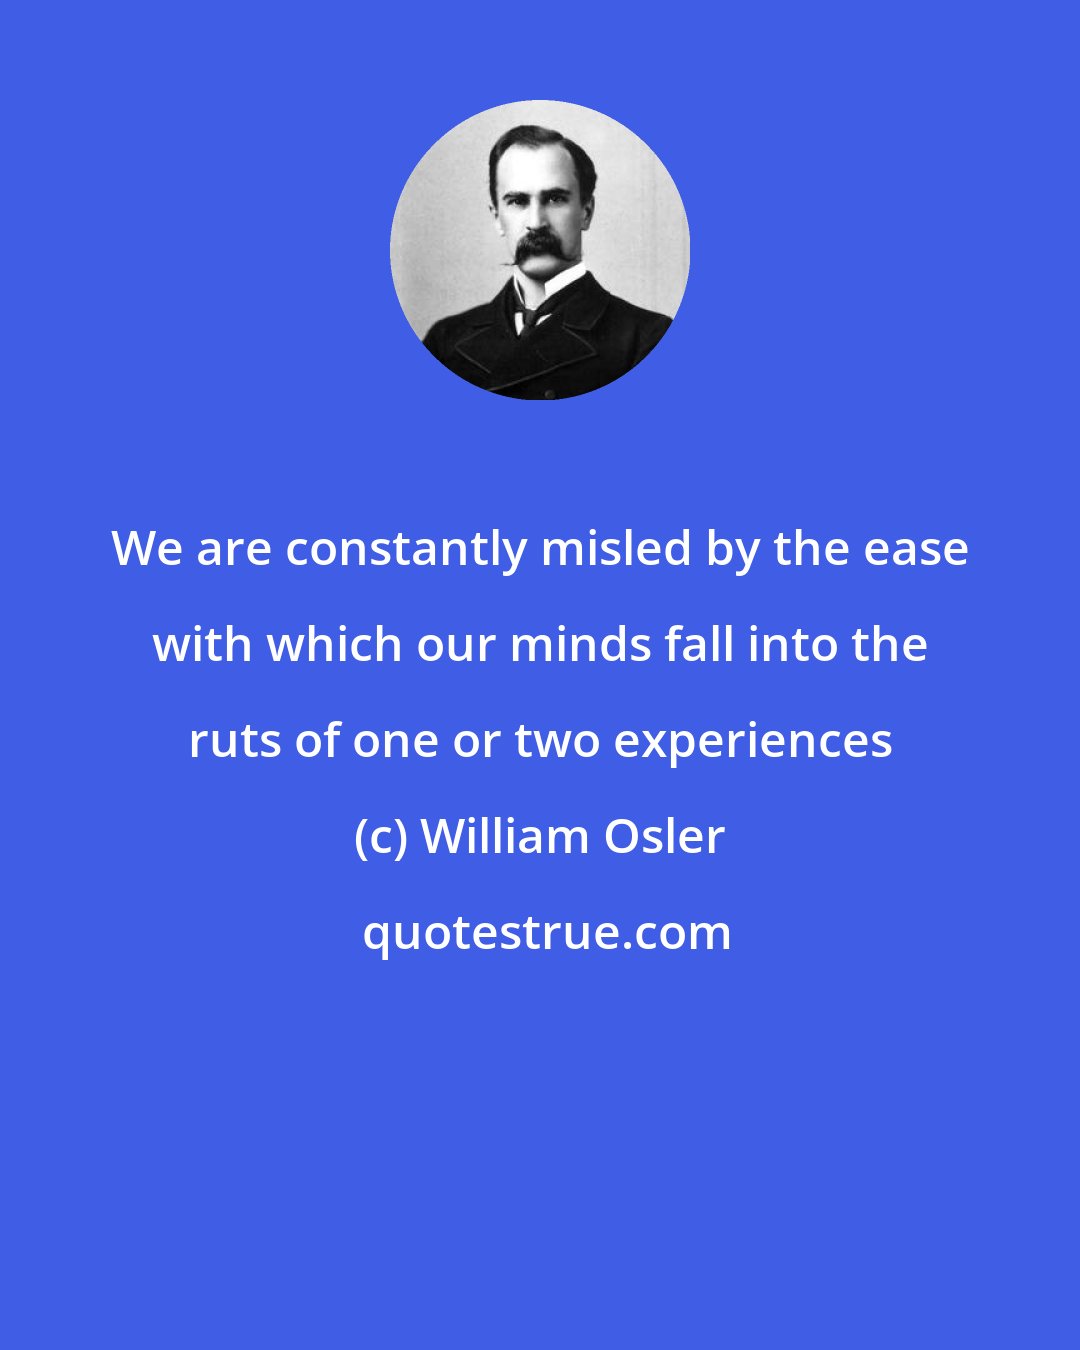 William Osler: We are constantly misled by the ease with which our minds fall into the ruts of one or two experiences